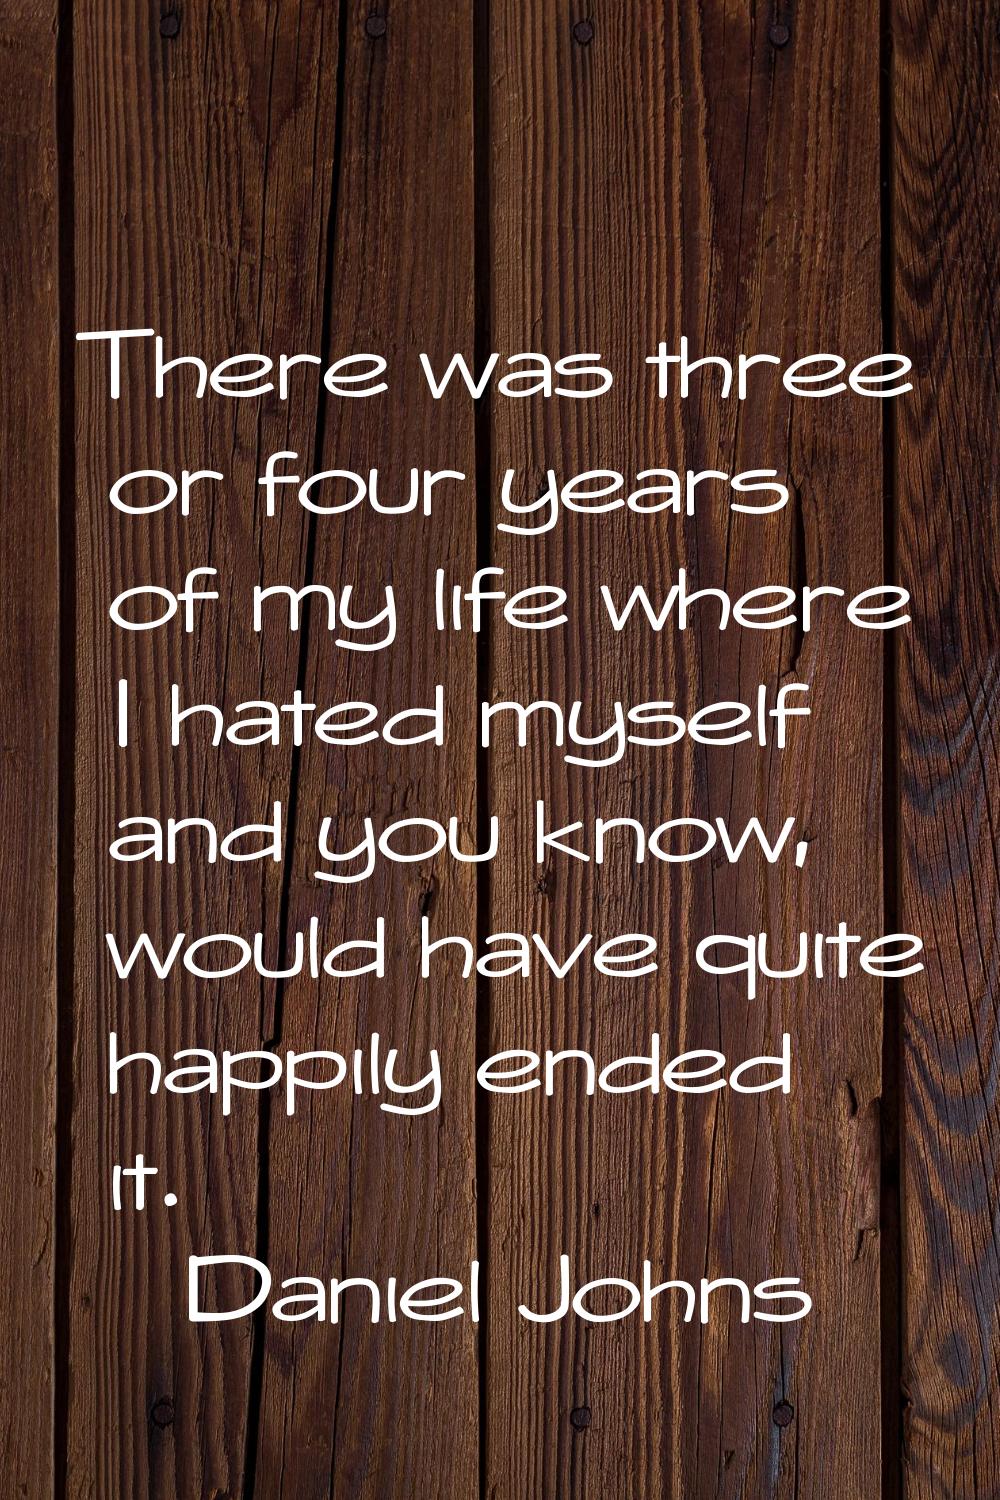 There was three or four years of my life where I hated myself and you know, would have quite happil